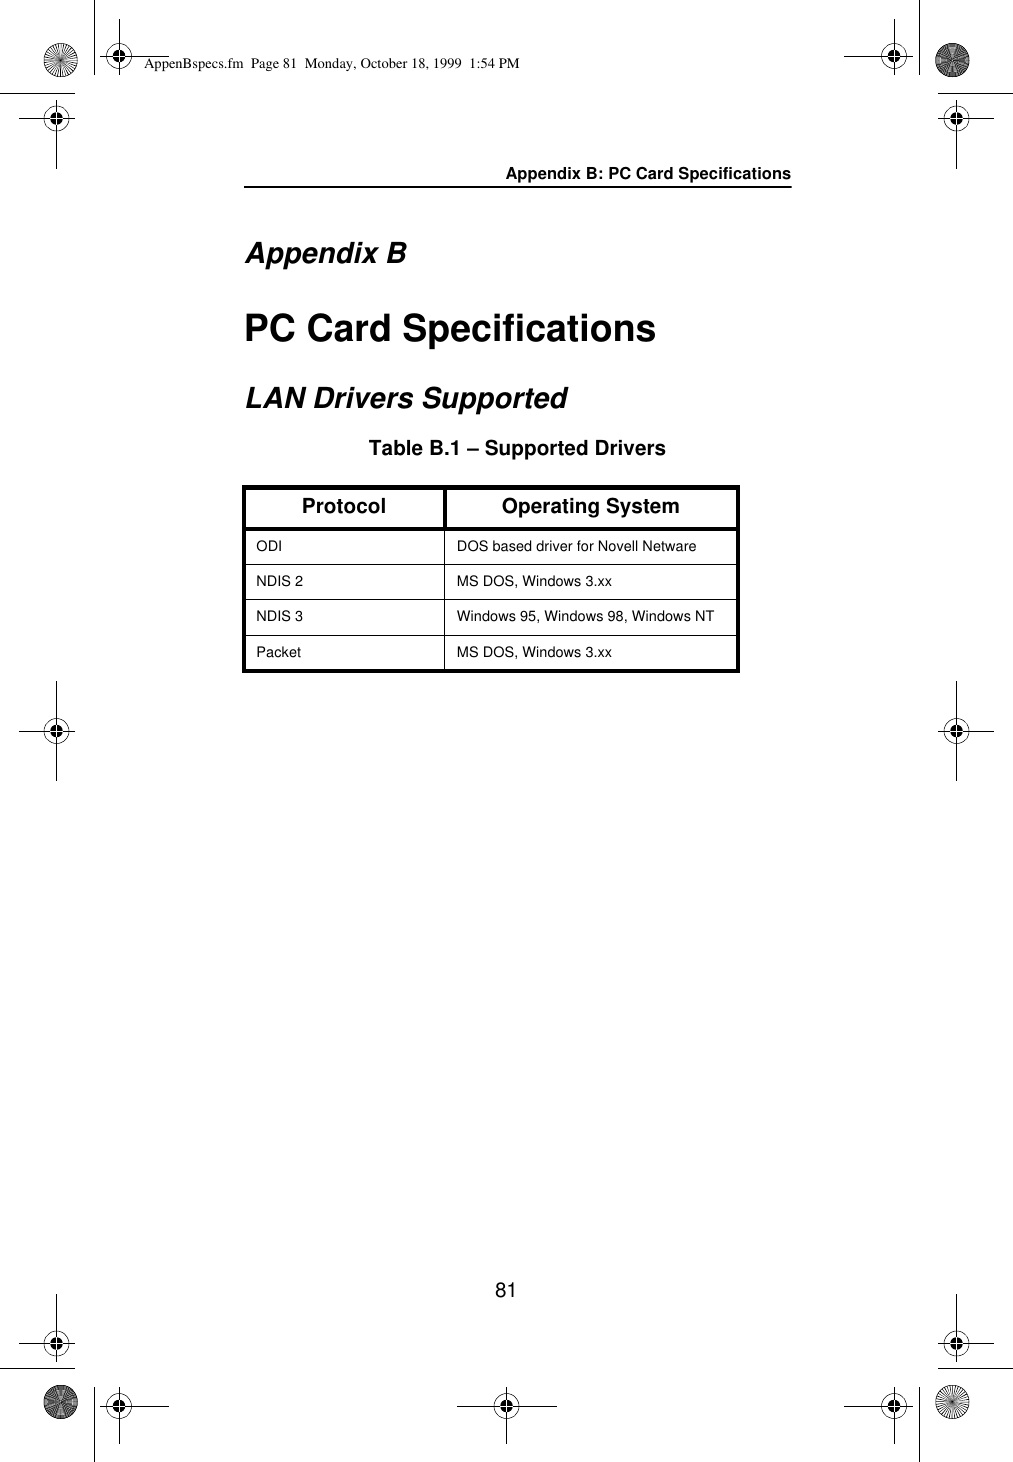 Appendix B: PC Card Specifications81Appendix BPC Card SpecificationsLAN Drivers SupportedTable B.1 – Supported DriversProtocol Operating SystemODI DOS based driver for Novell NetwareNDIS 2 MS DOS, Windows 3.xxNDIS 3 Windows 95, Windows 98, Windows NTPacket MS DOS, Windows 3.xxAppenBspecs.fm  Page 81  Monday, October 18, 1999  1:54 PM